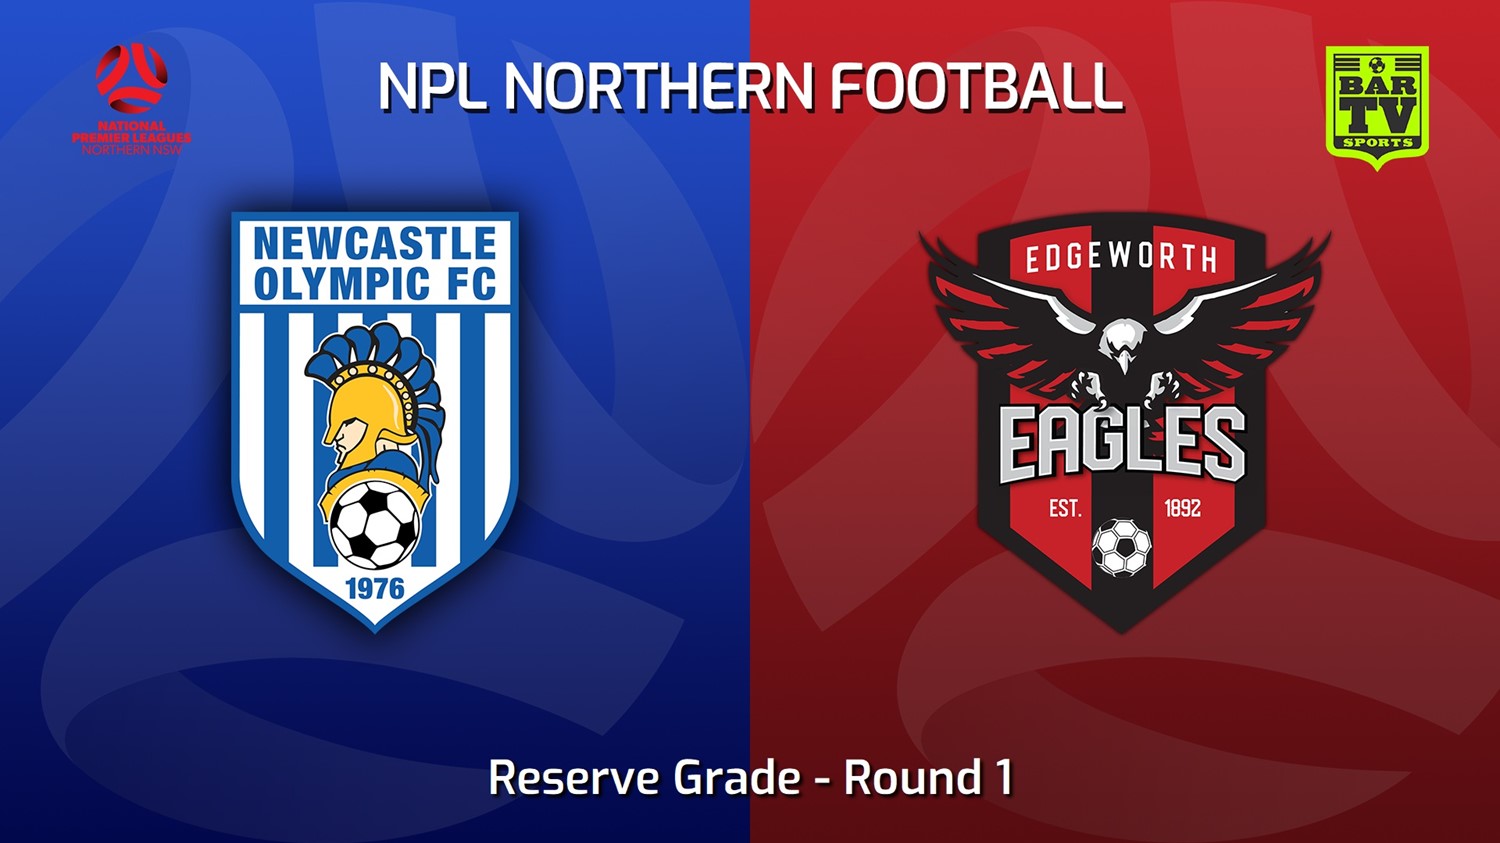 230304-NNSW NPLM Res Round 1 - Newcastle Olympic Res v Edgeworth Eagles Res Minigame Slate Image